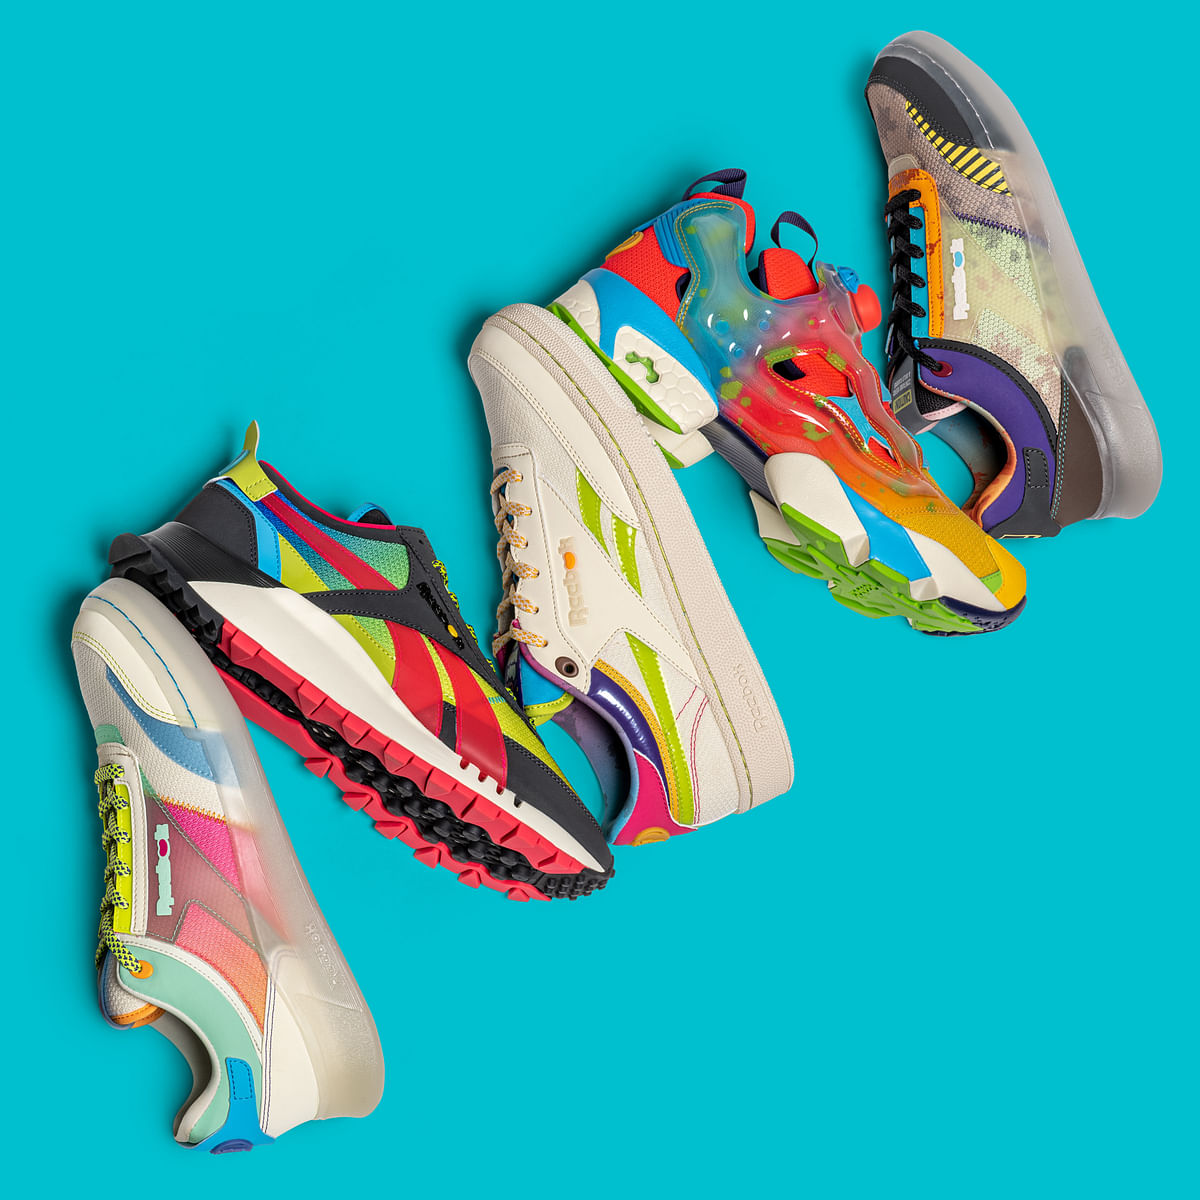 Reebok partners Jelly Belly for colourful sneaker collection